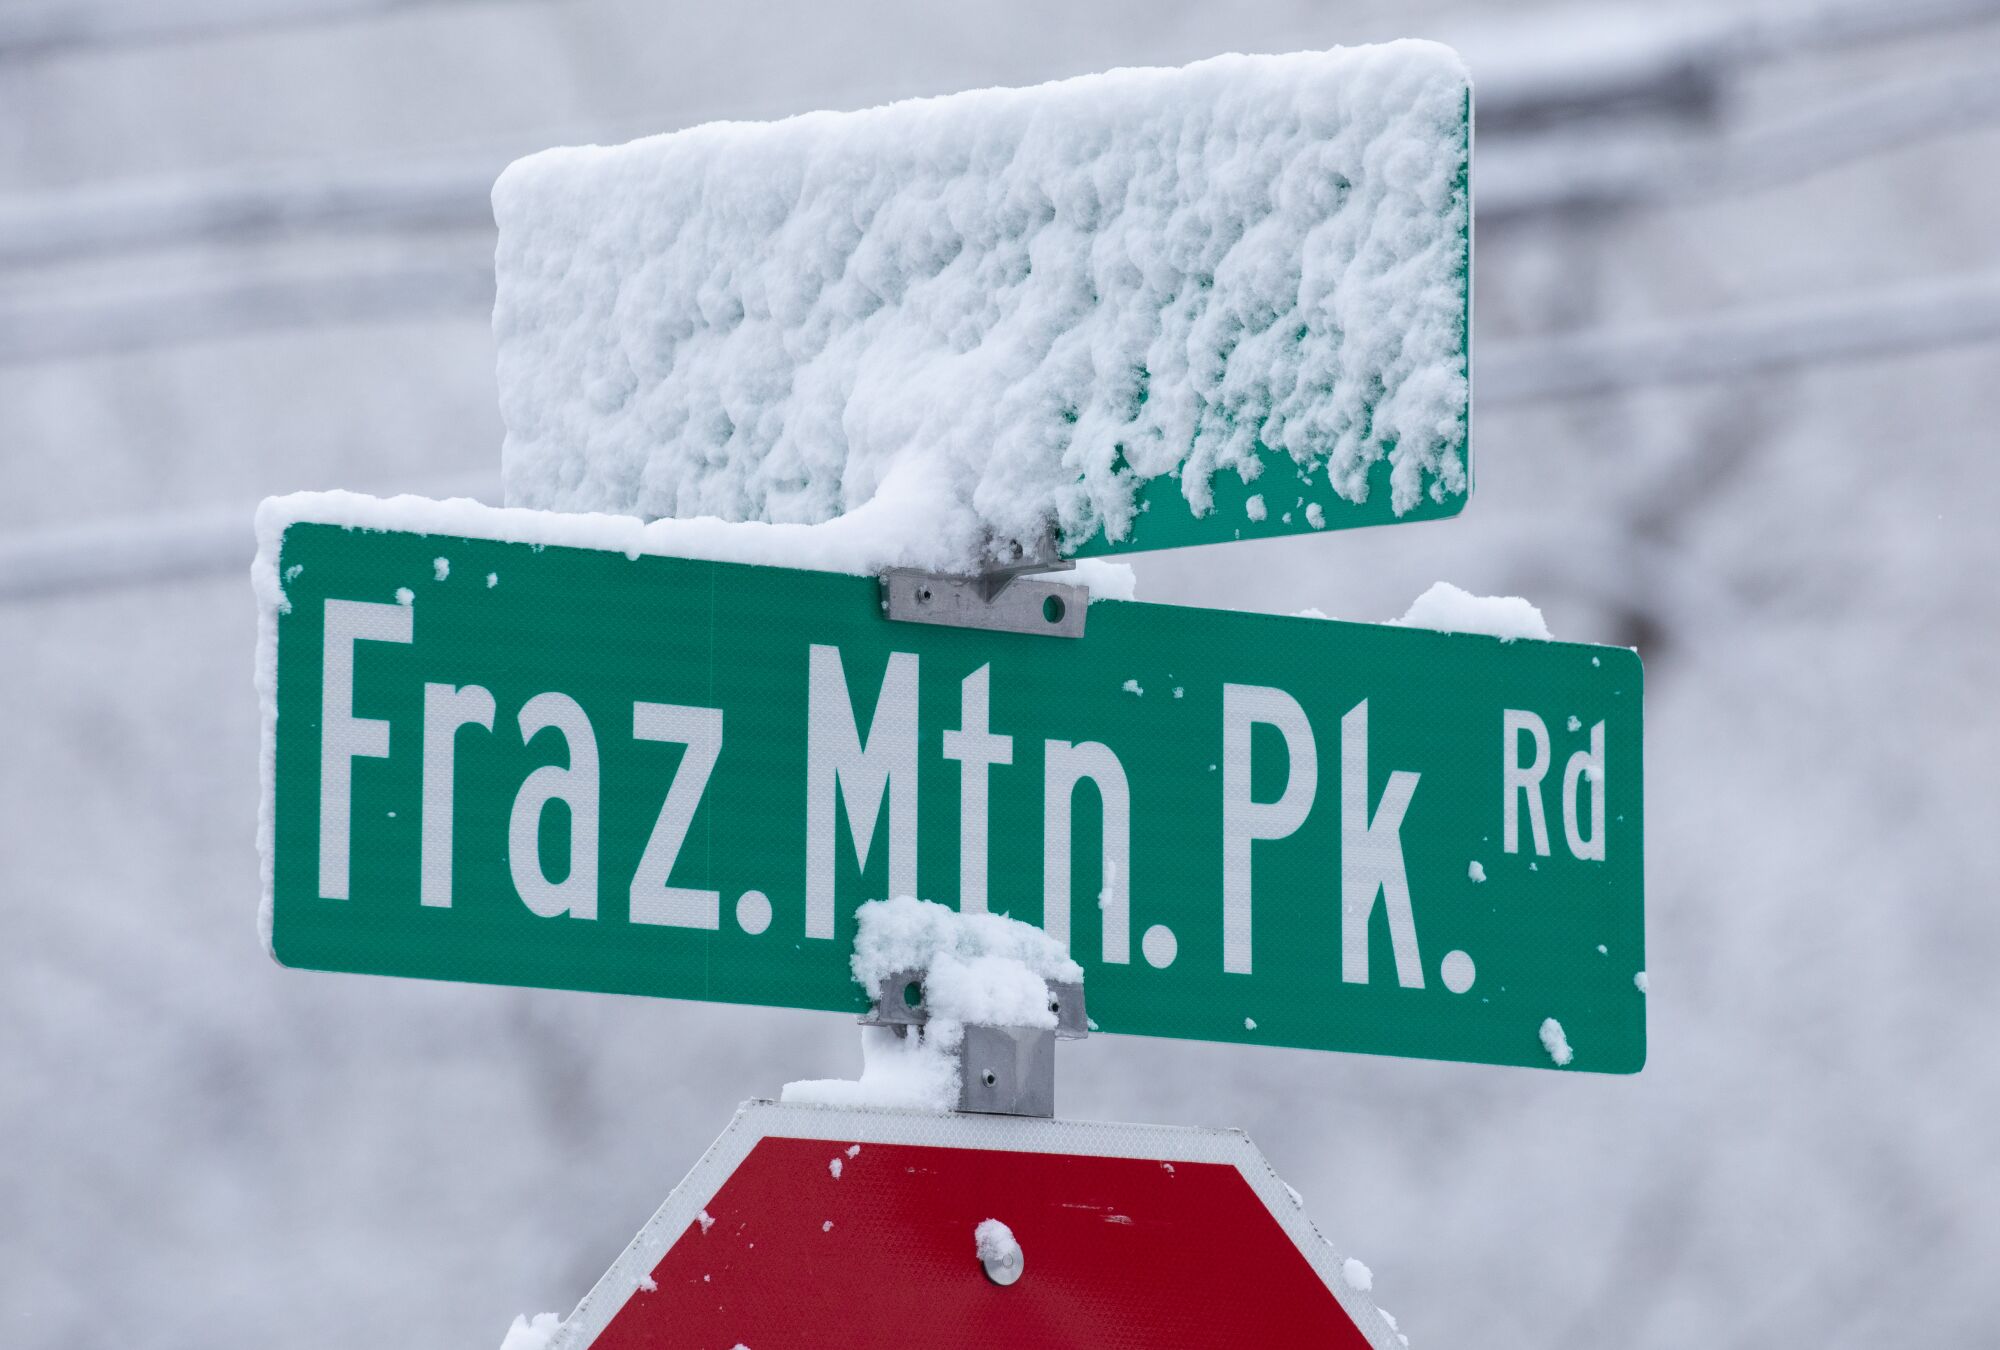 Snow accumulates on a street sign in Frazier Park